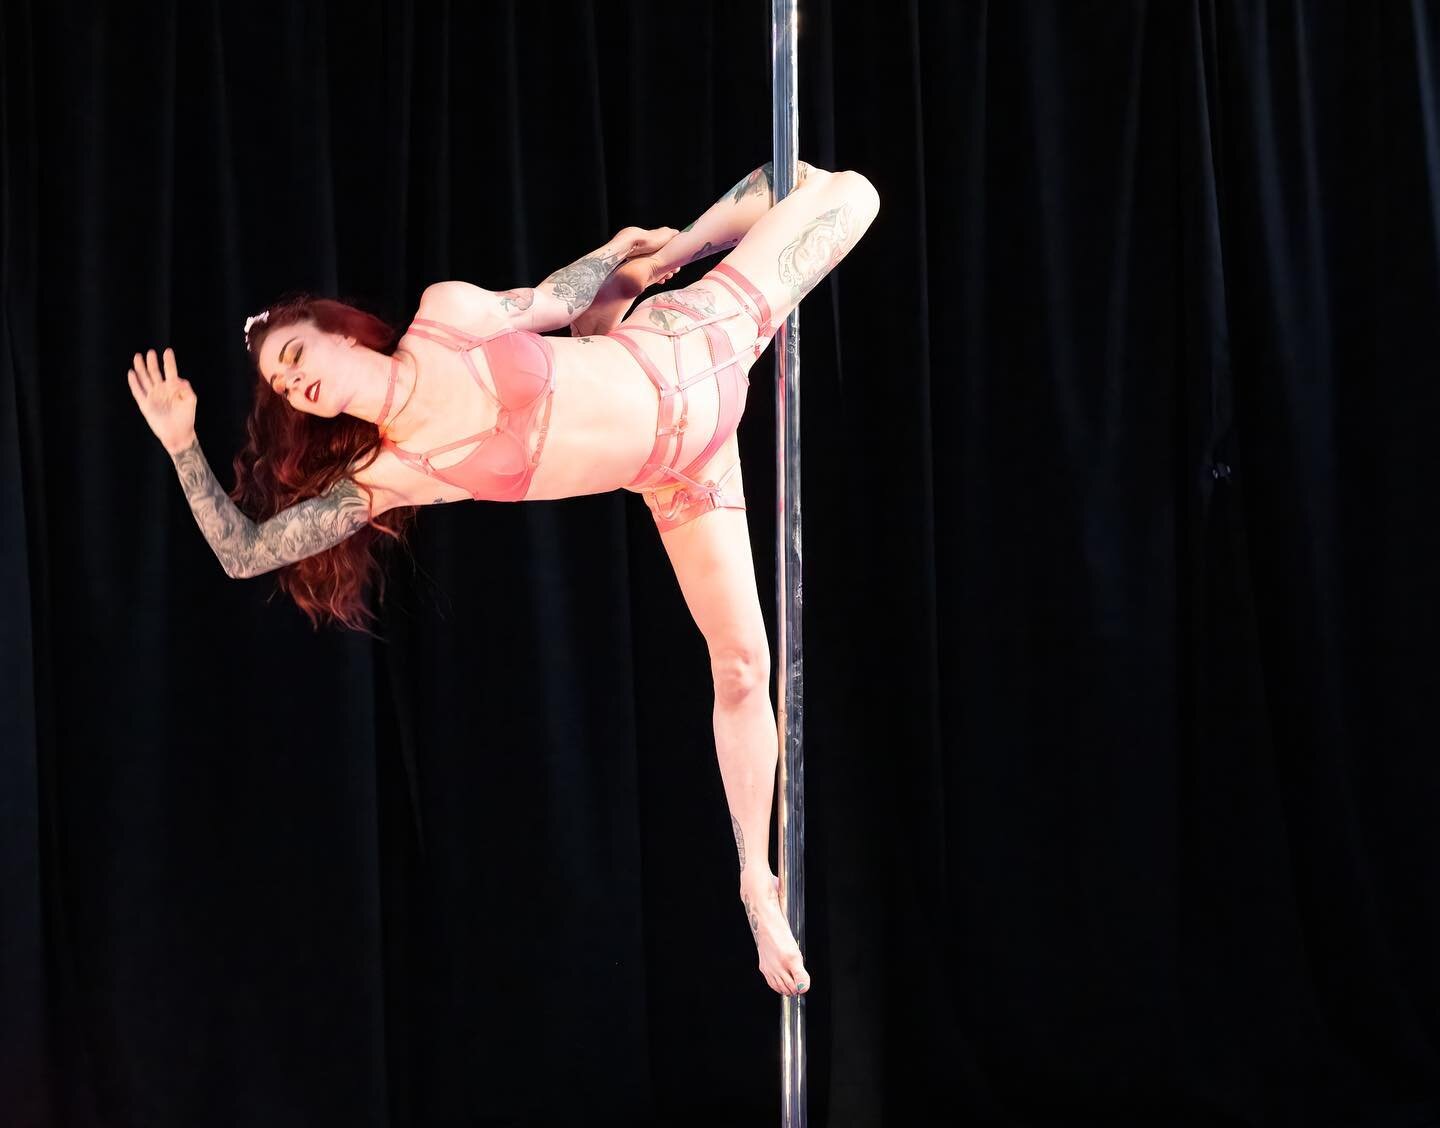 Re-living the glory days of @ssproducersaustin &lsquo;s May production of Fetish 😍🥵
.
.
📸 @captured_desire_photography 
.
.
#aerialshow #poleperformance #polekitten #pdcupidvariation #pdspidermonkey #cabaret #girlsofsummer #maypole #showgirl #show